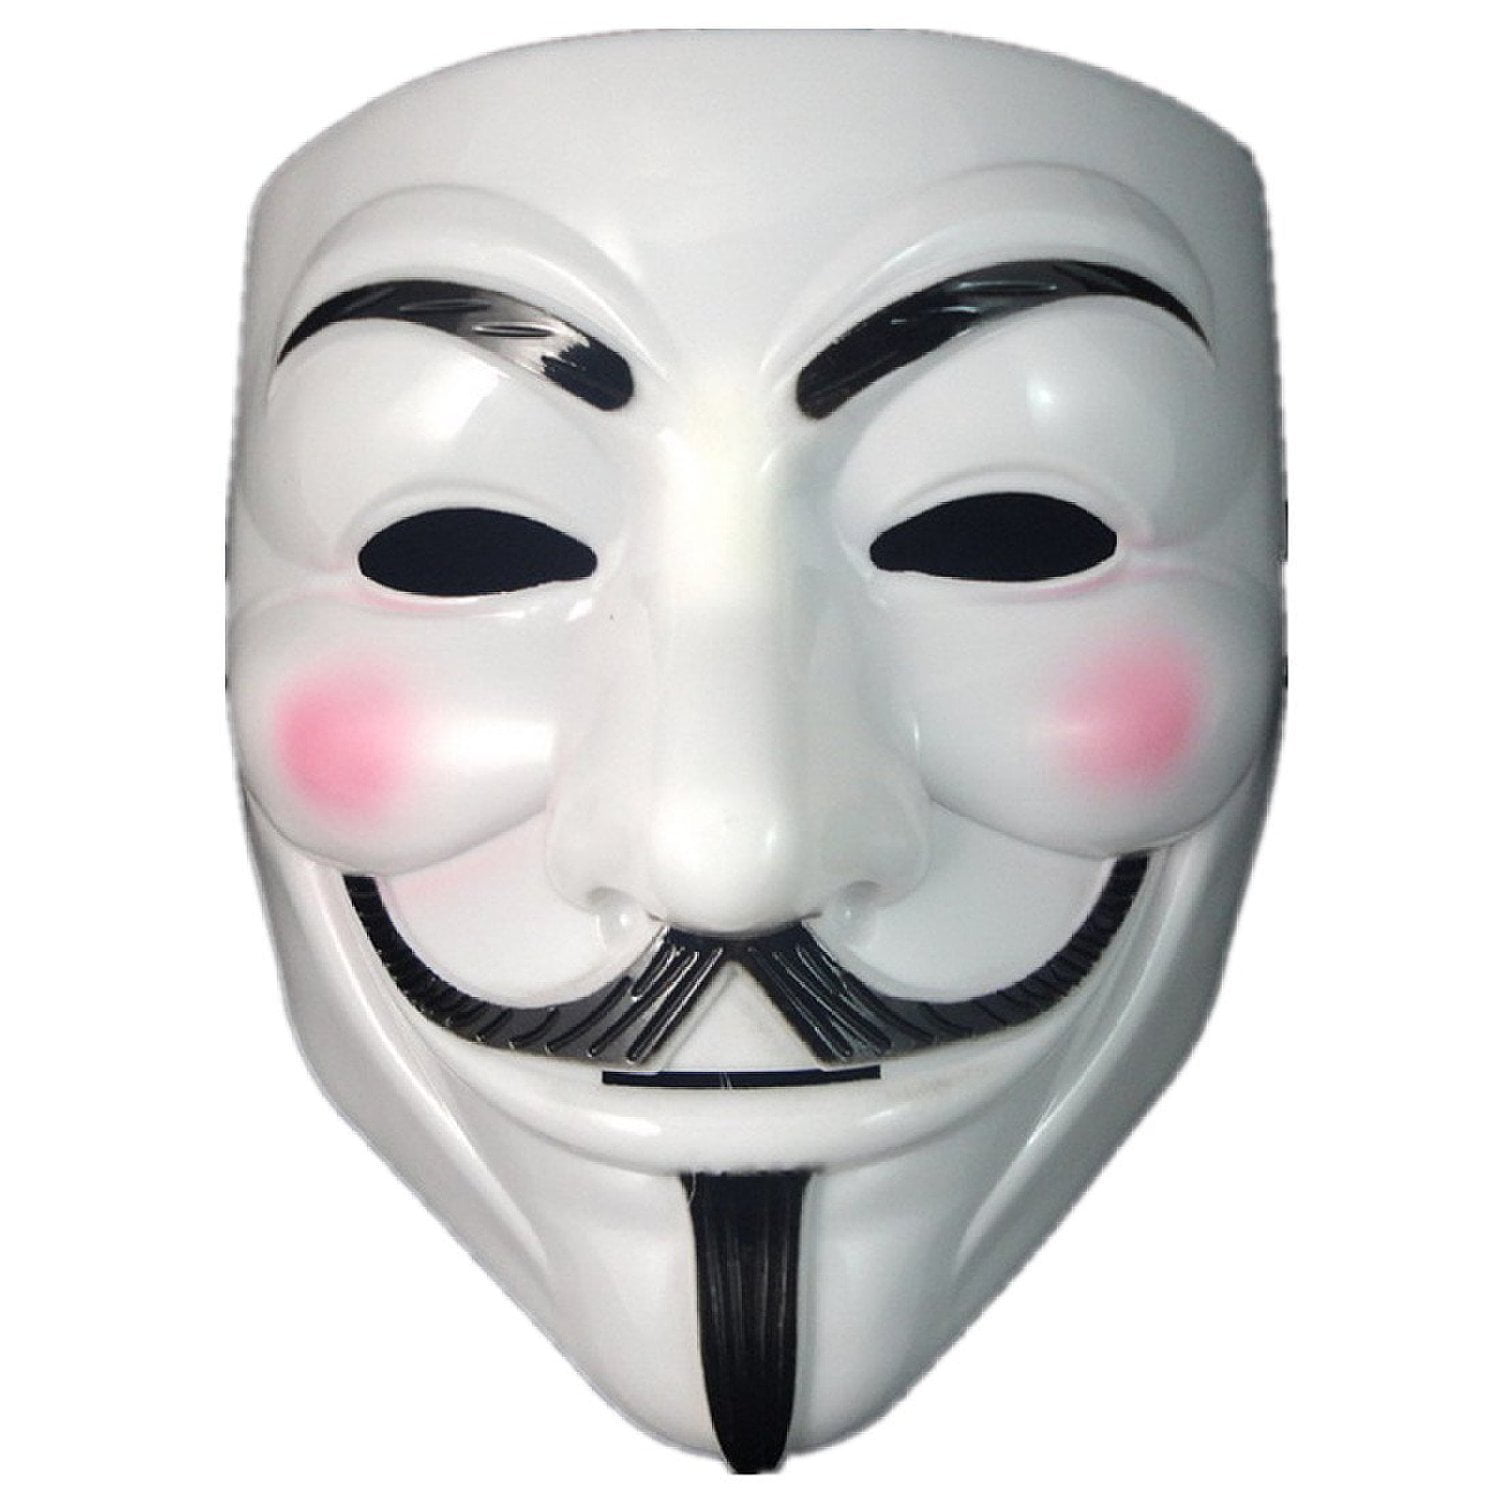 Smartoy V For Vendetta Mask Guy Fawkes Halloween Masquerade Party Face 